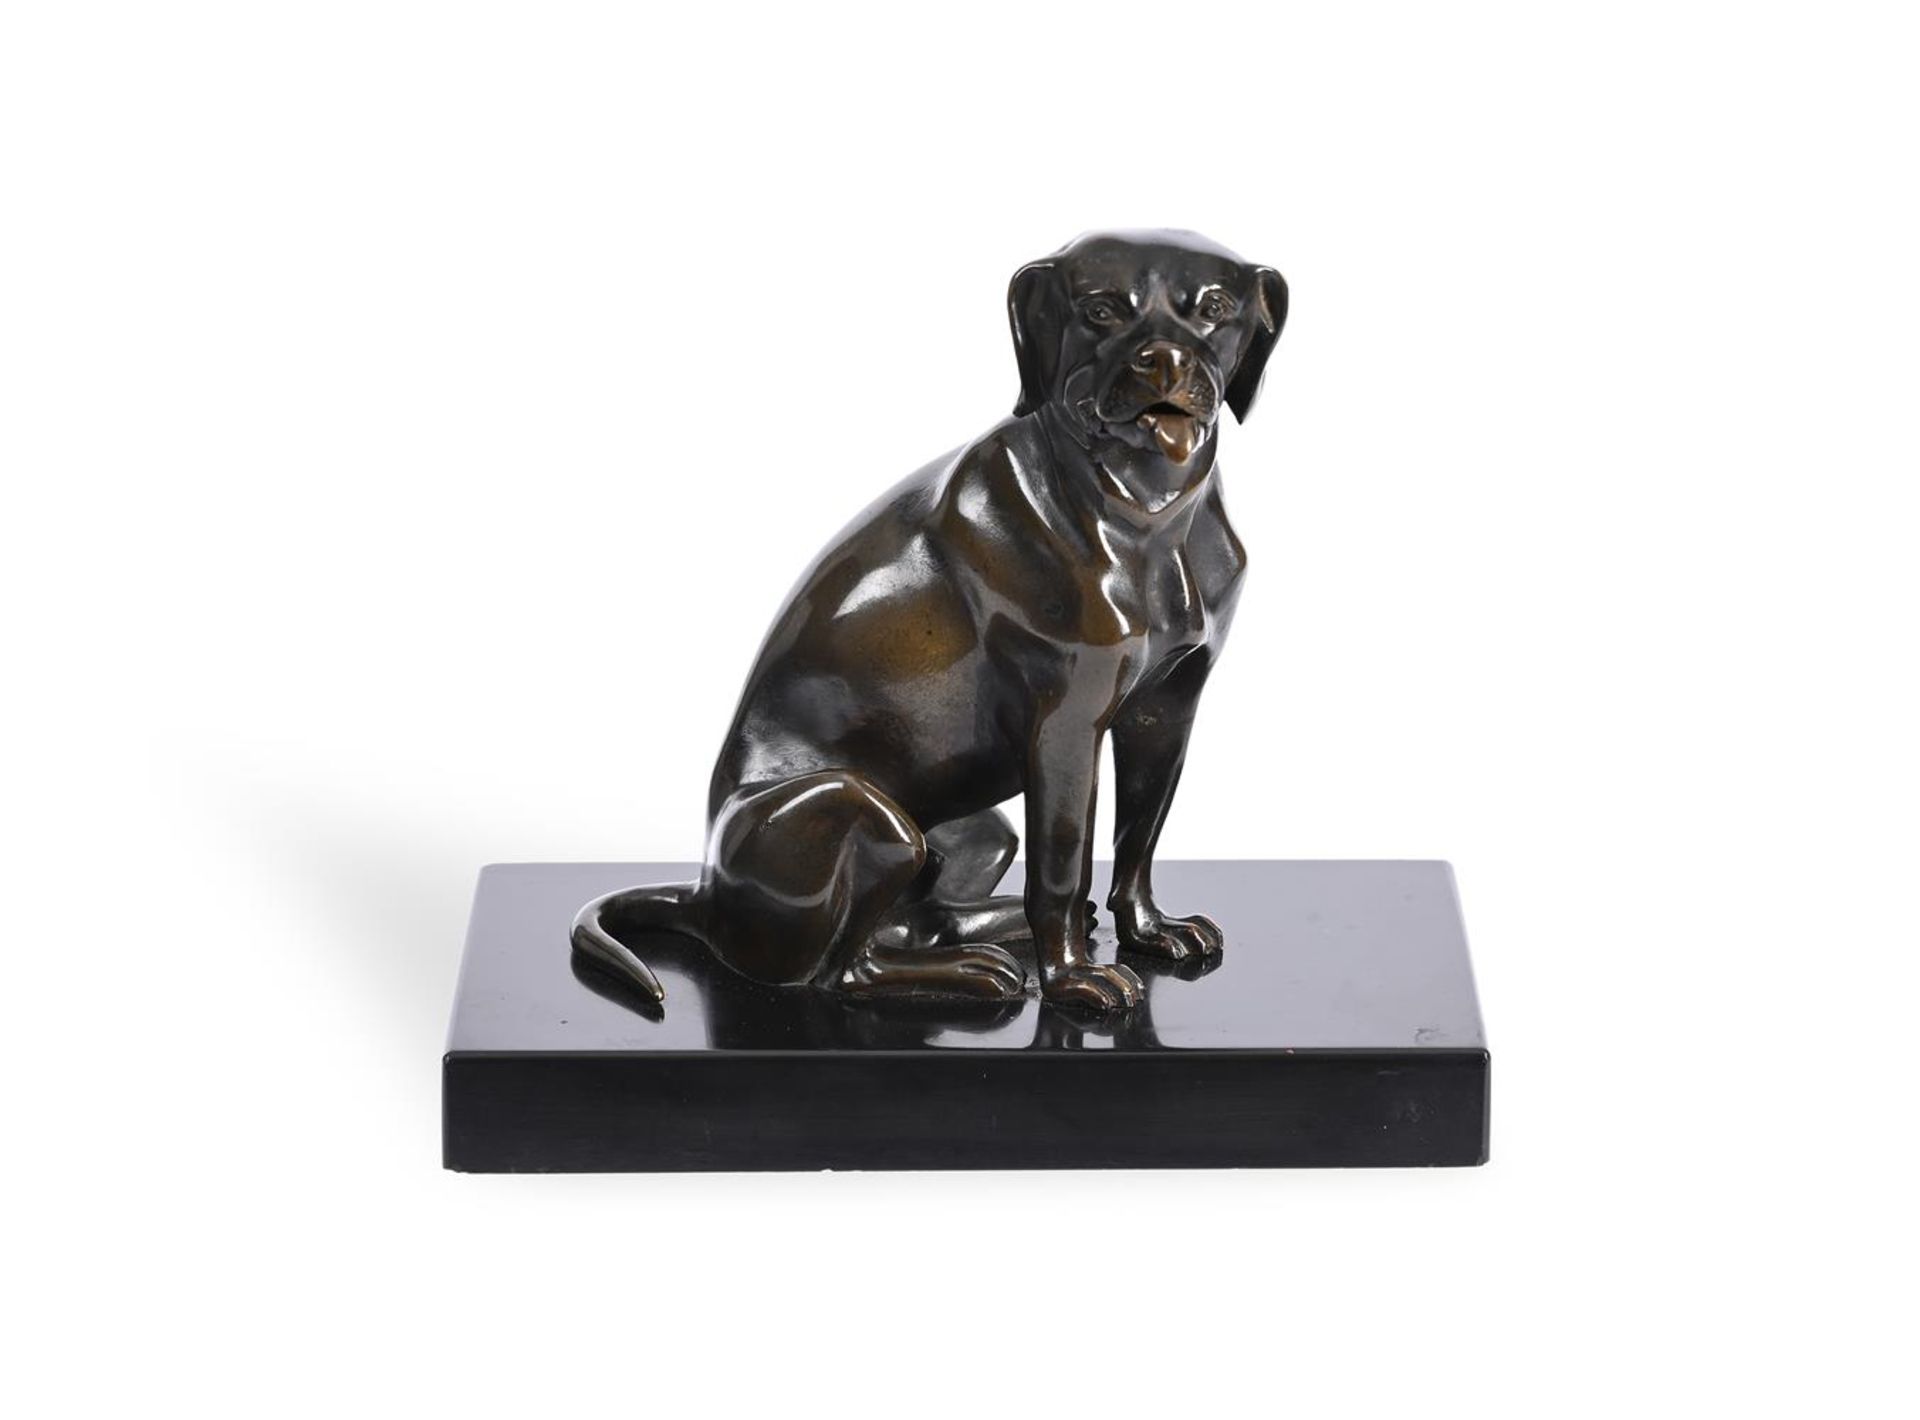 A BRONZE DOG VISTING CARD HOLDER, IN THE MANNER OF THOMAS WEEKS, EARLY 19TH CENTURY